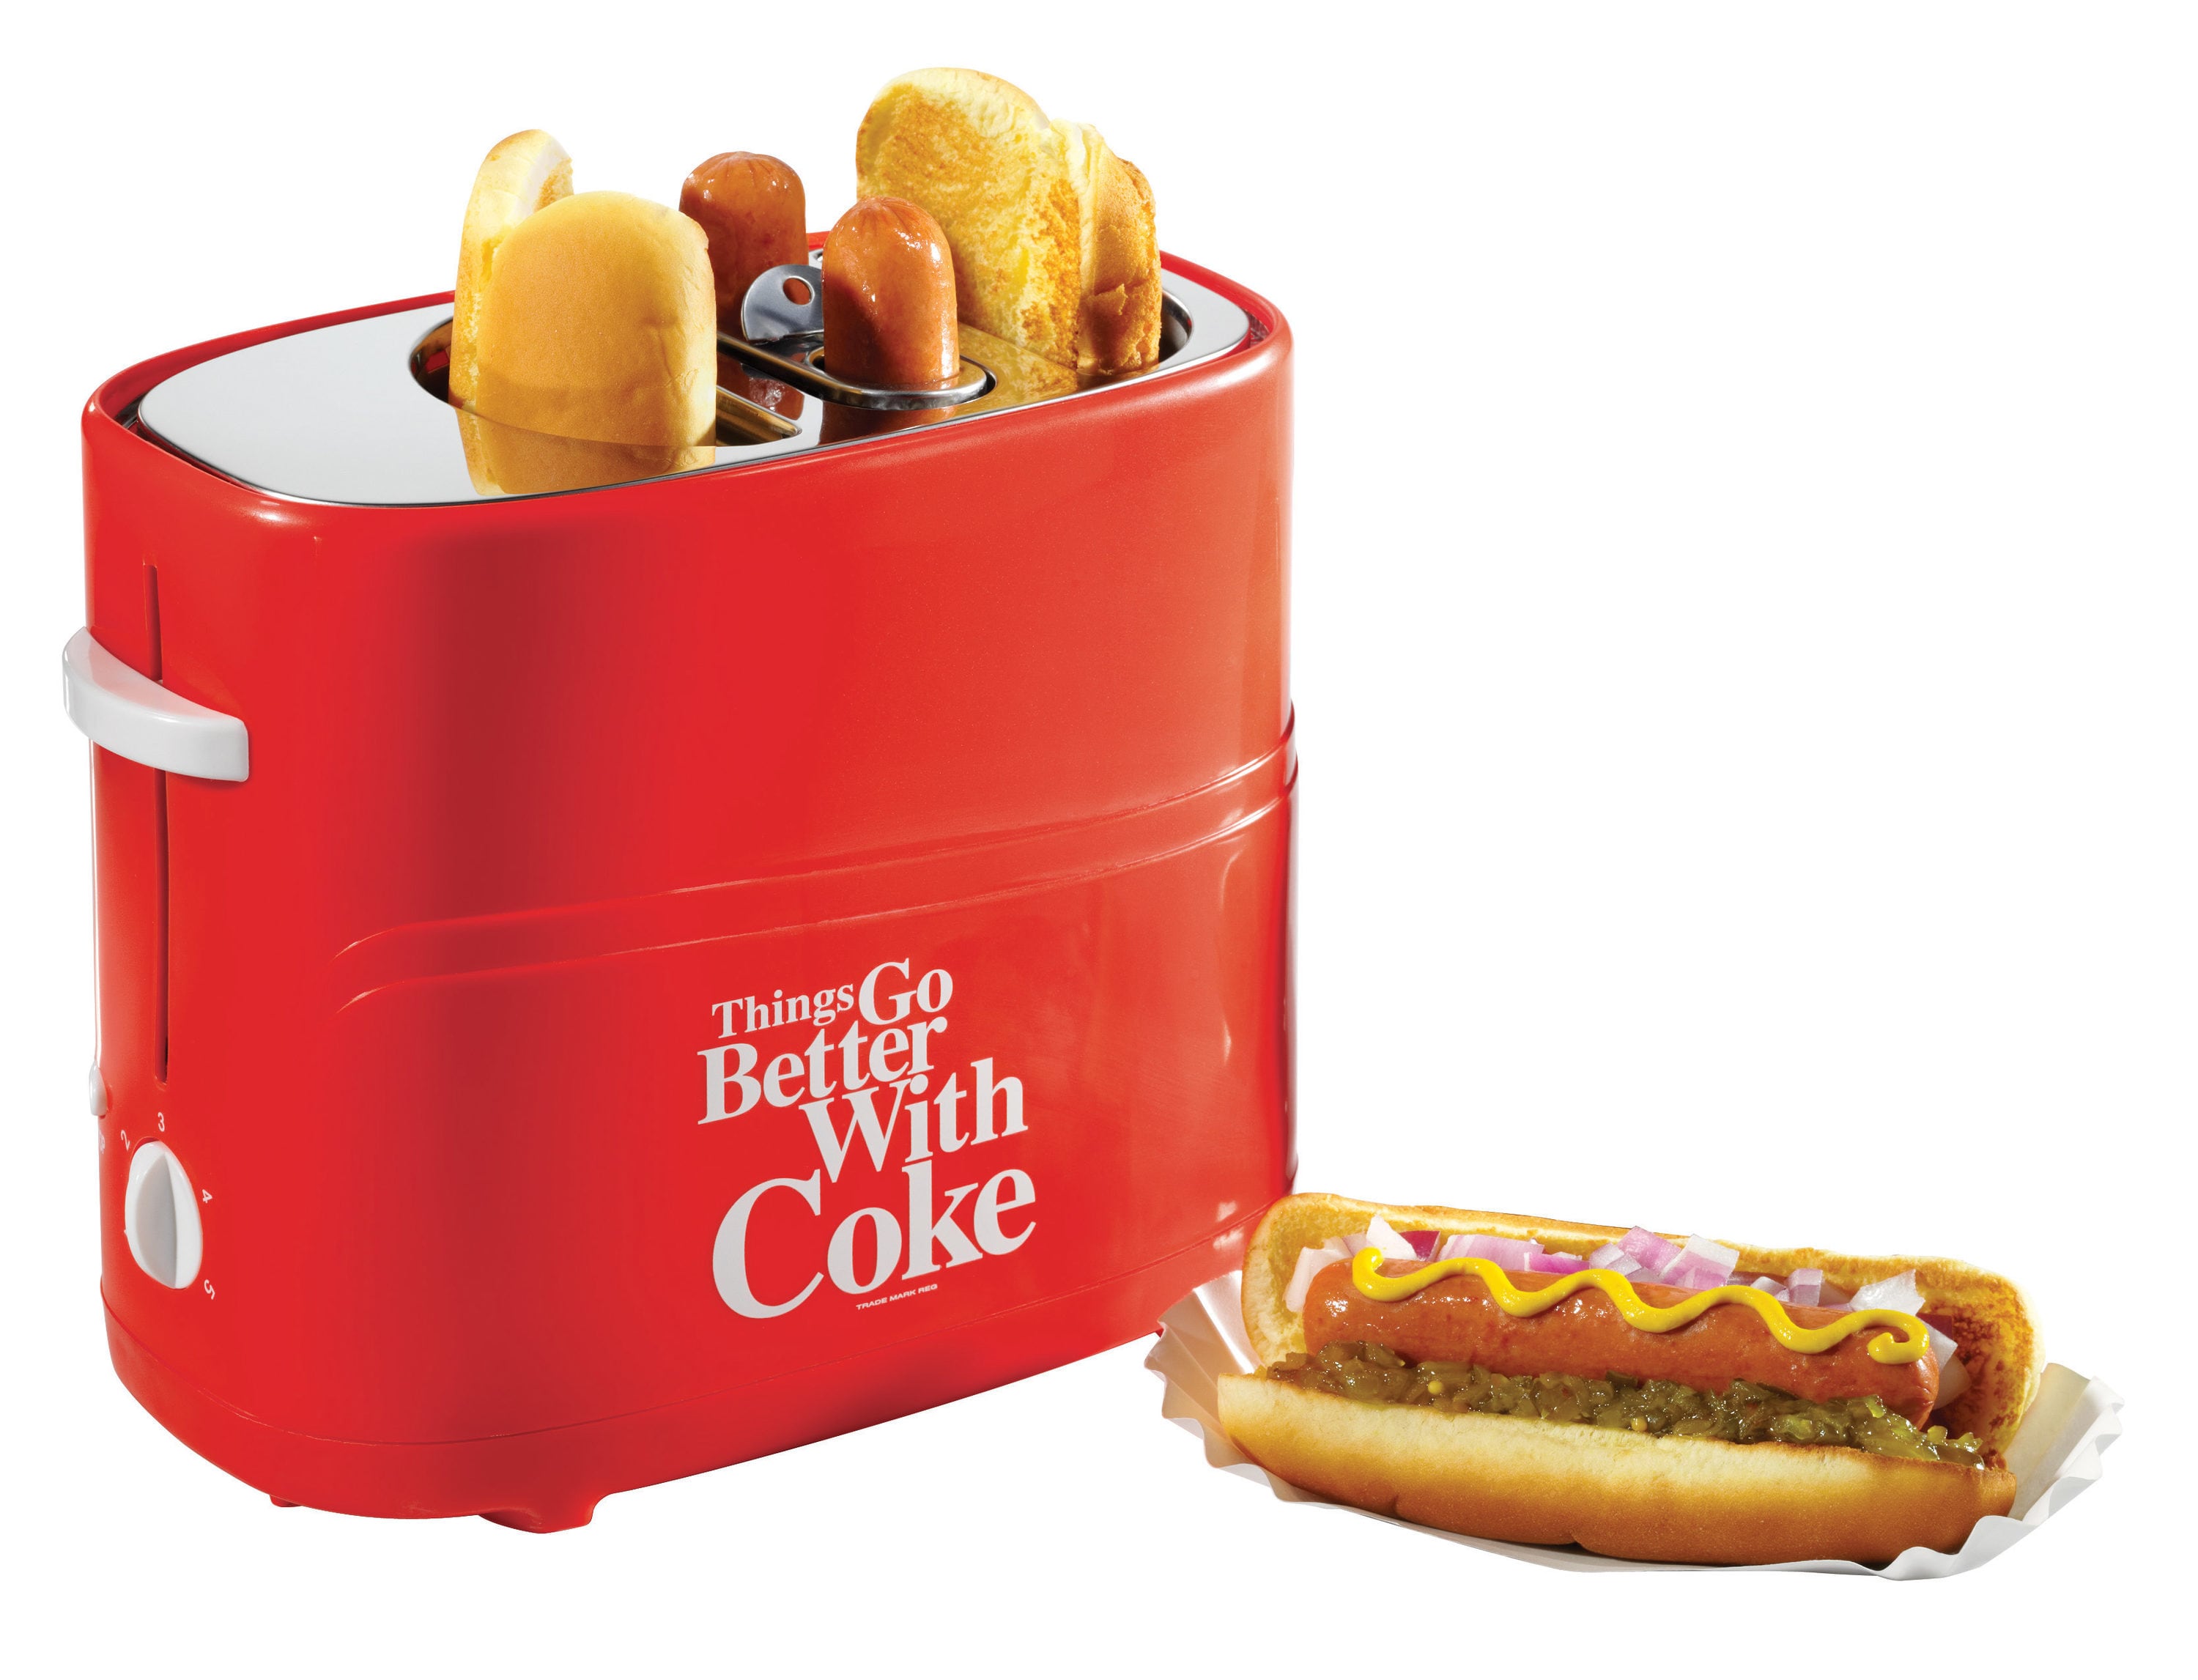 Nostalgia Coca-Cola Series Pop-Up Hot Dog Toaster - Red, UL Safety